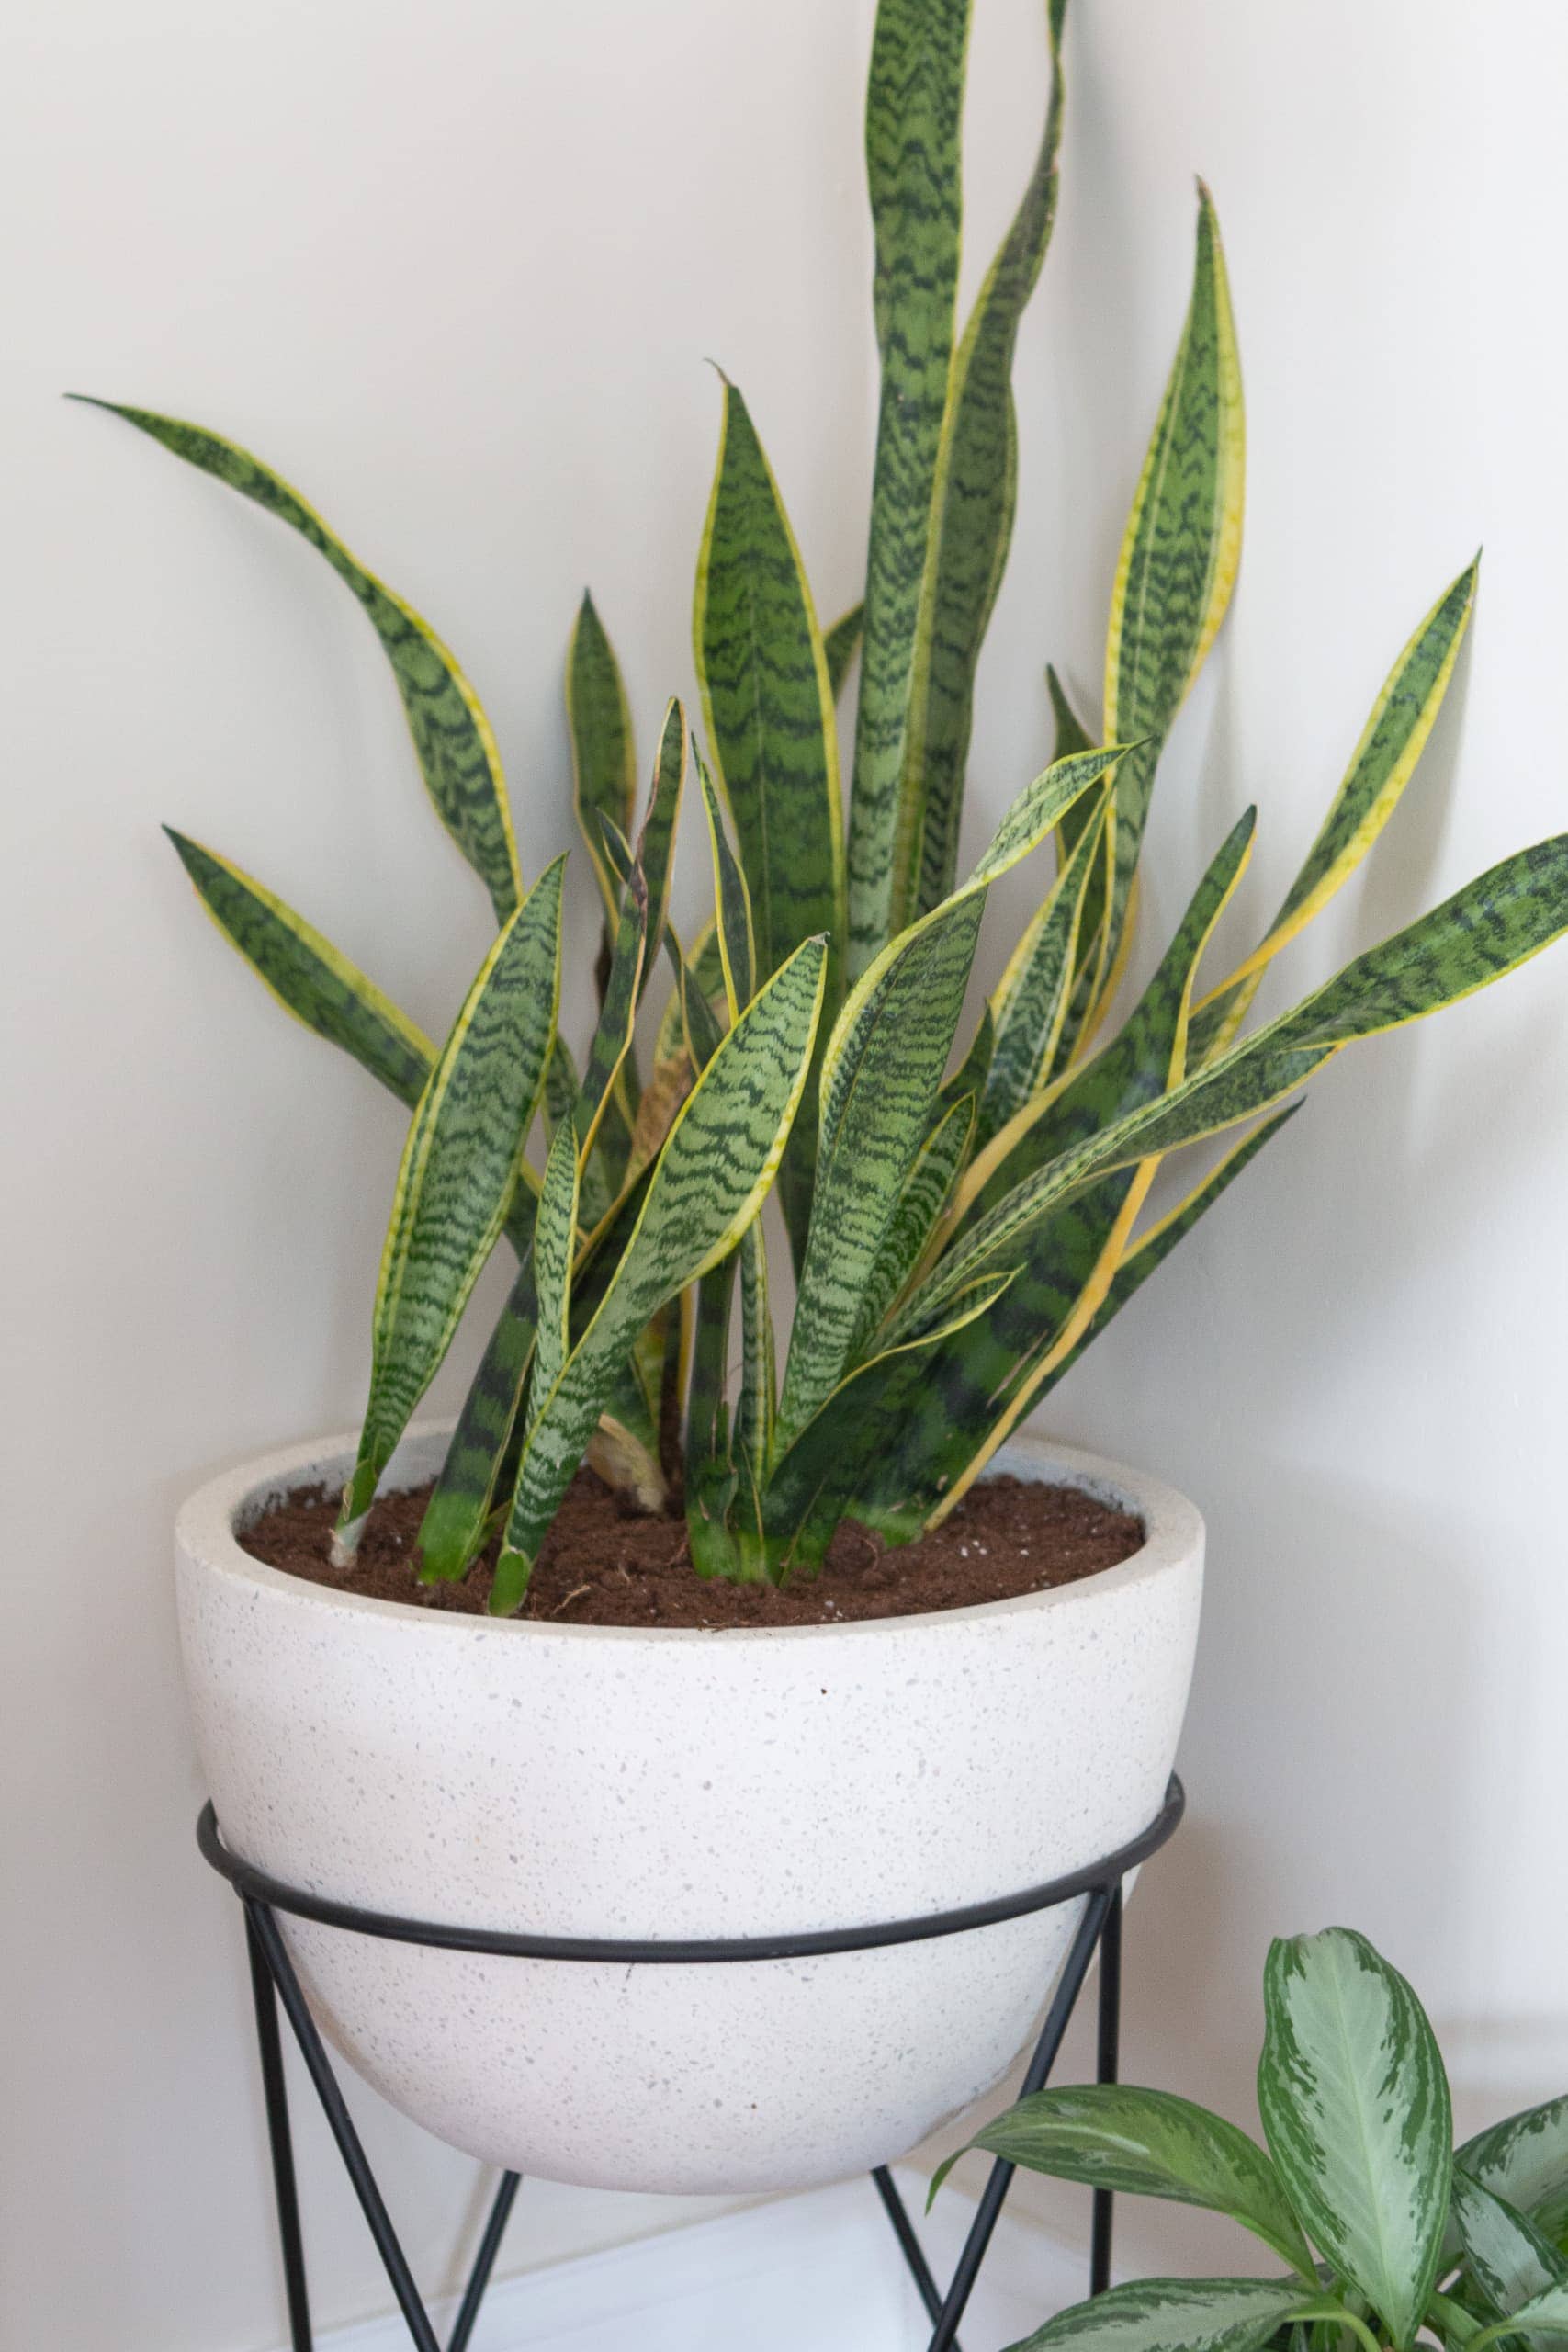 The Indoor Plants I'm Keeping Alive in My House | The DIY Playbook